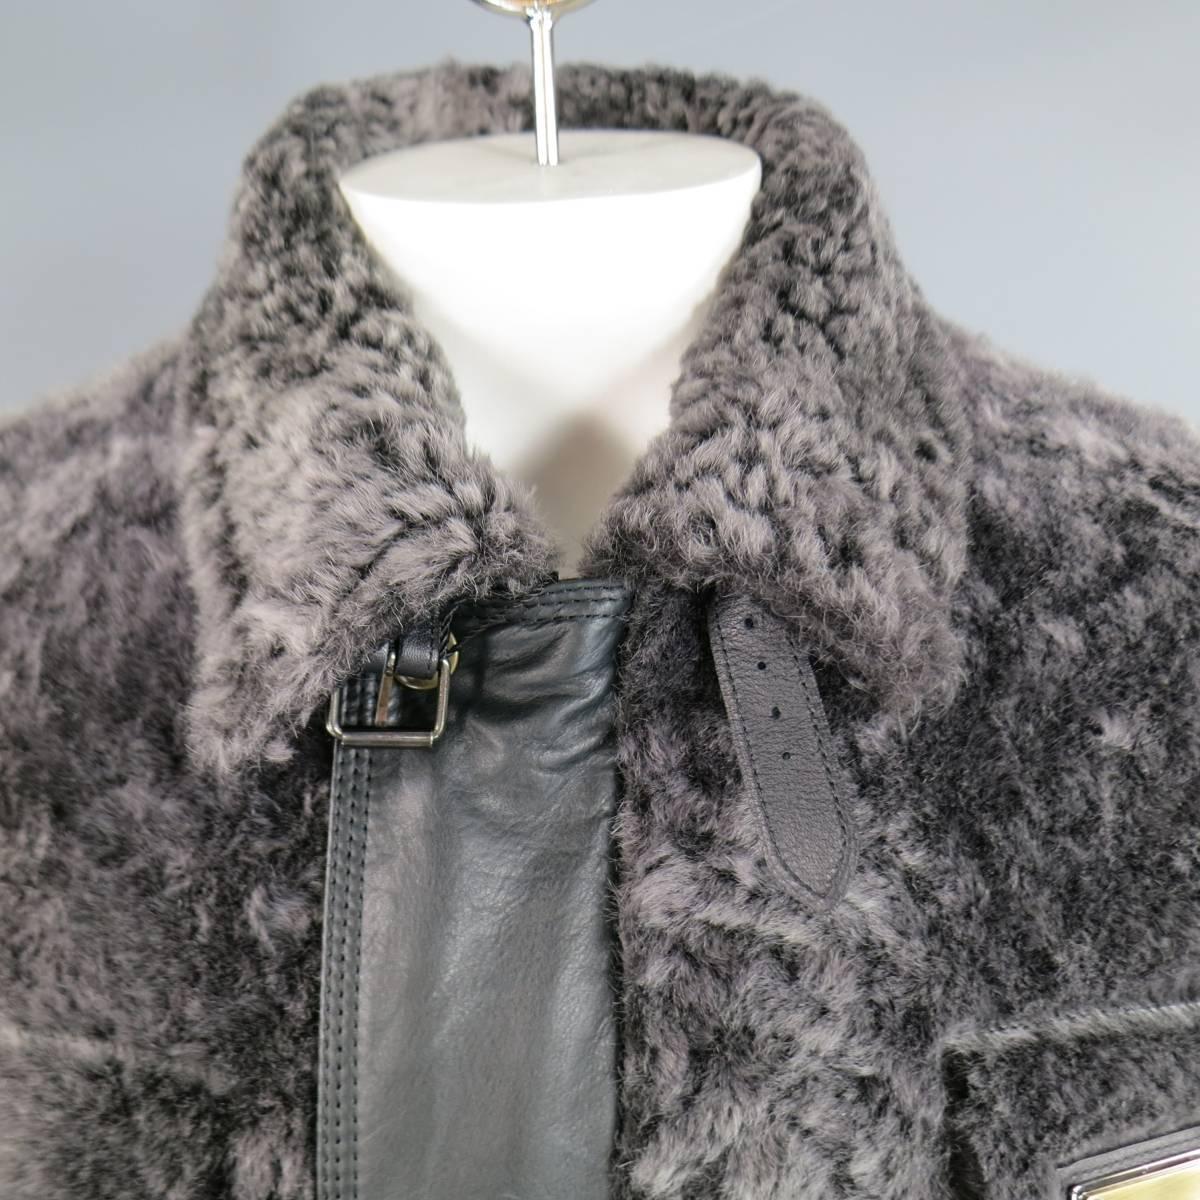 DOLCE & GABBANA winter jacket in a black and charcoal plaid wool featuring gray lambskin fur panels, pointed collar with belt, gold tone engraved plaque on chest, slit pockets, hidden leather placket zip closure, and side belts. Made in Italy.
